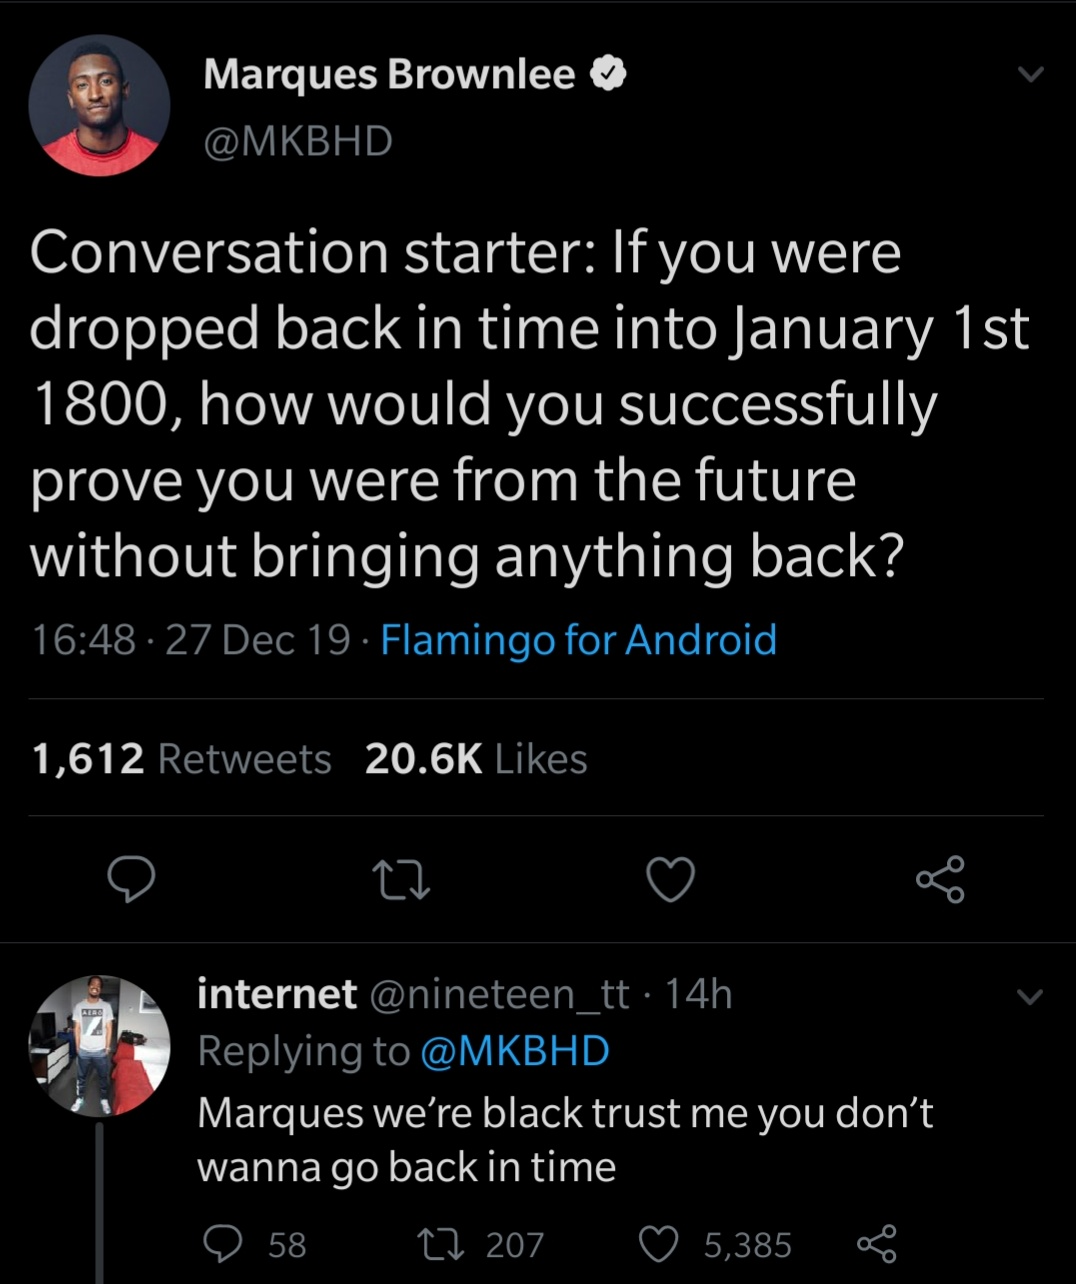 Time travel - Marques Brownlee Conversation starter If you were dropped back in time into January 1st 1800, how would you successfully prove you were from the future, without bringing anything back? 27 Dec 19. Flamingo for Android 1,612 otz internet . 14h